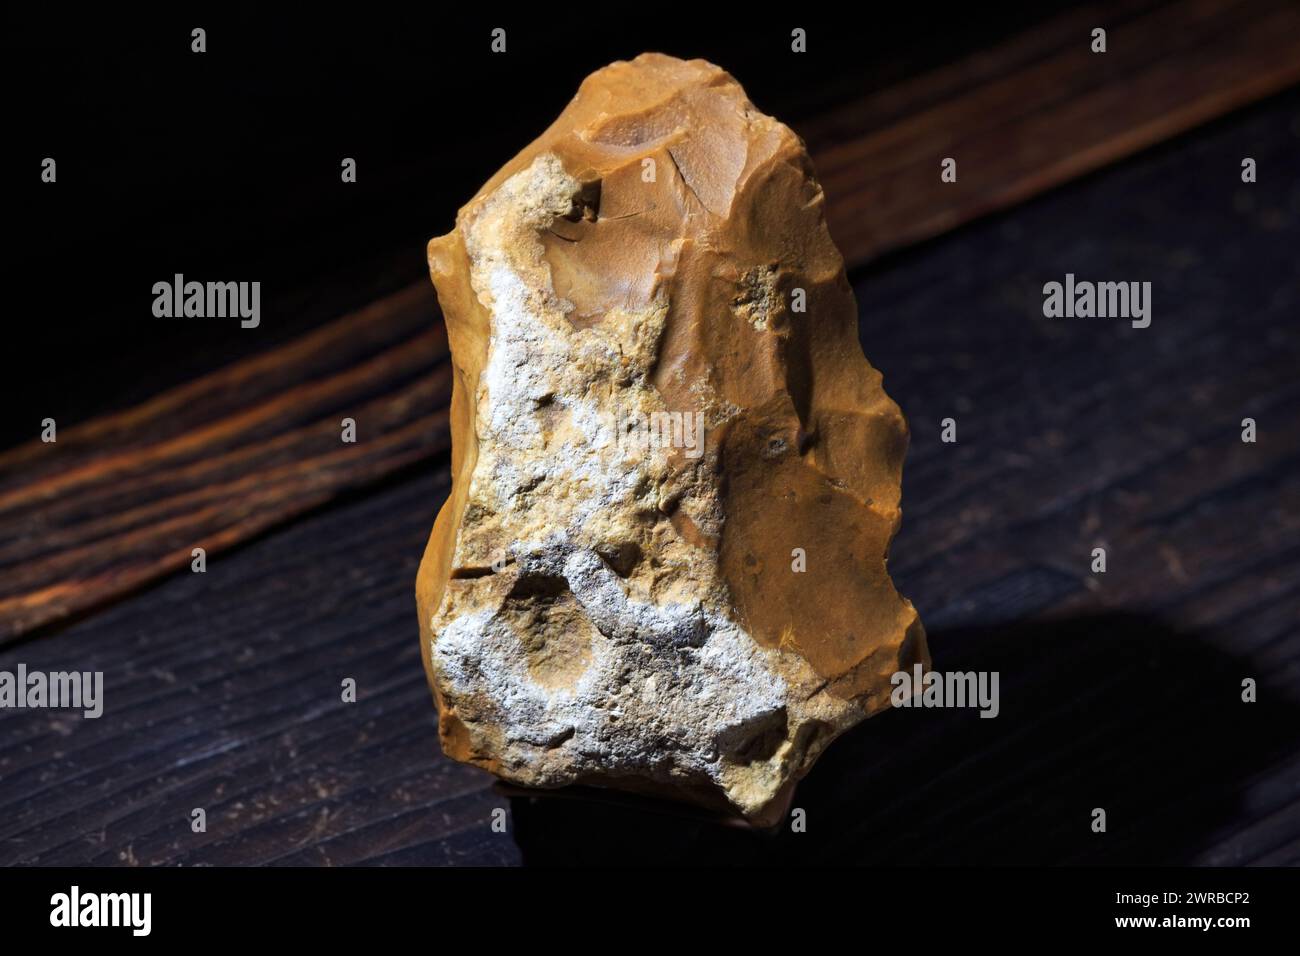 Stone ax made of brown flint with remains of a nodule crust, a Stone Age tool Stock Photo